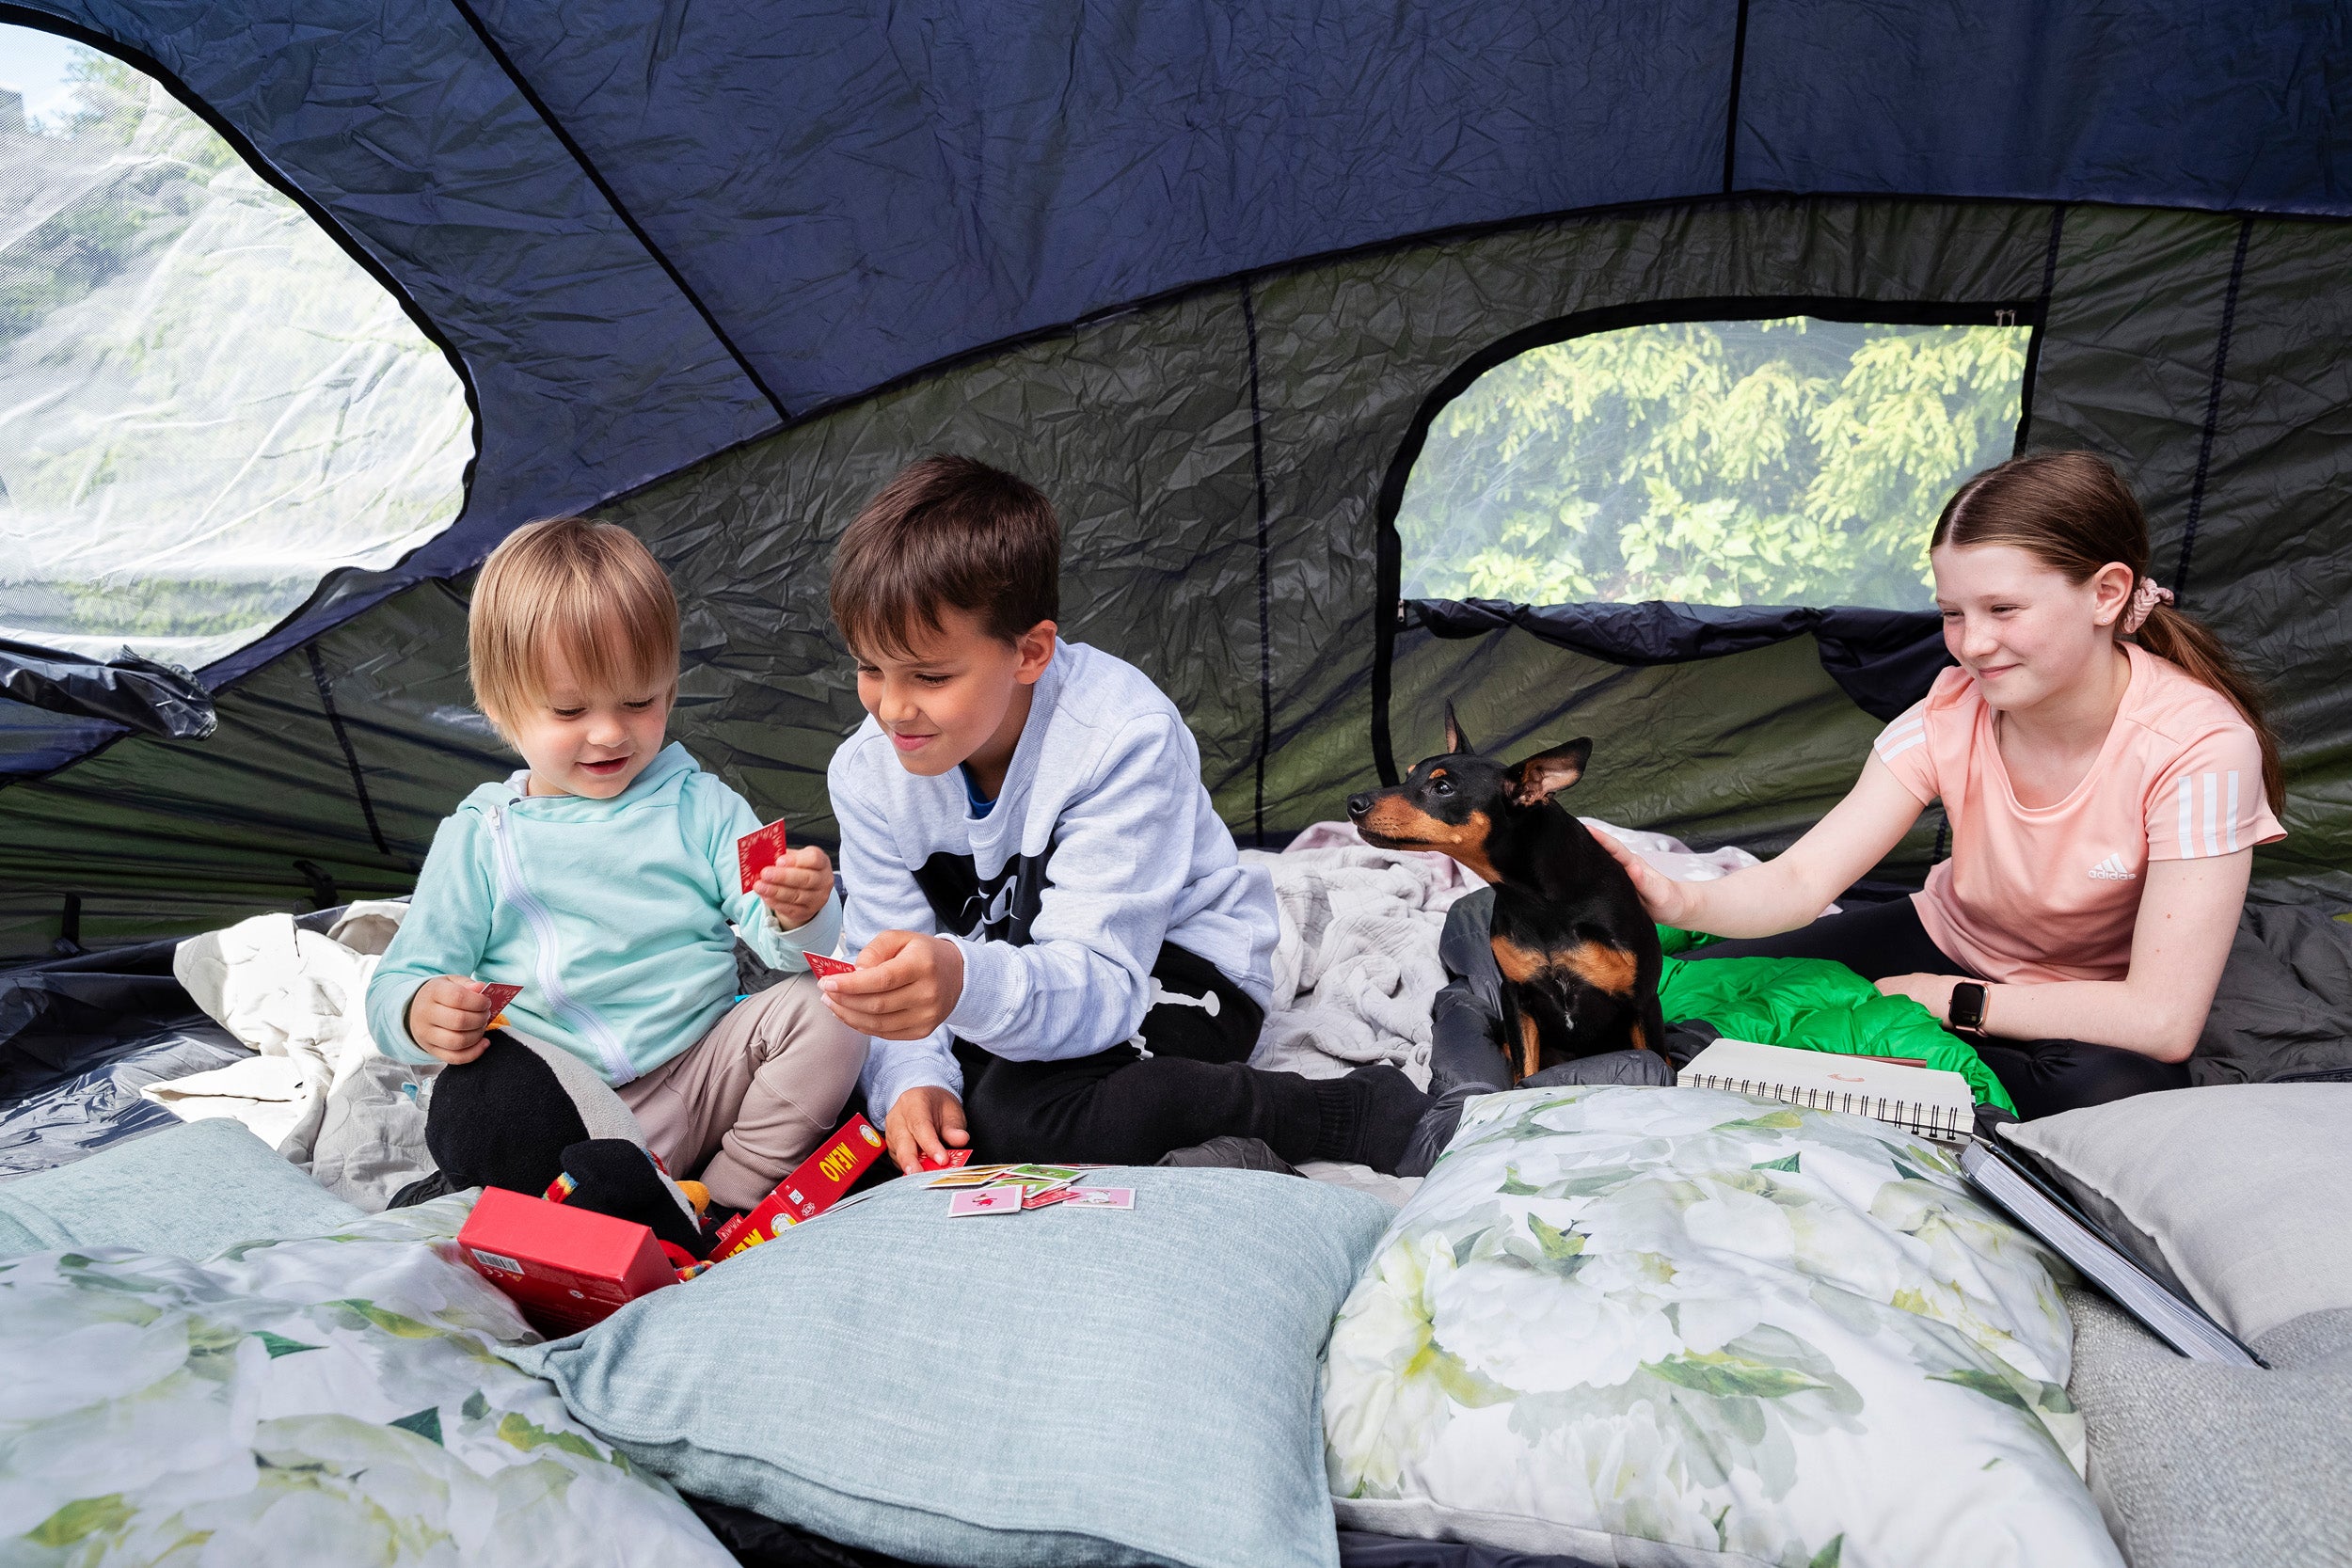 Kids reading and playing inside a trampoline tent